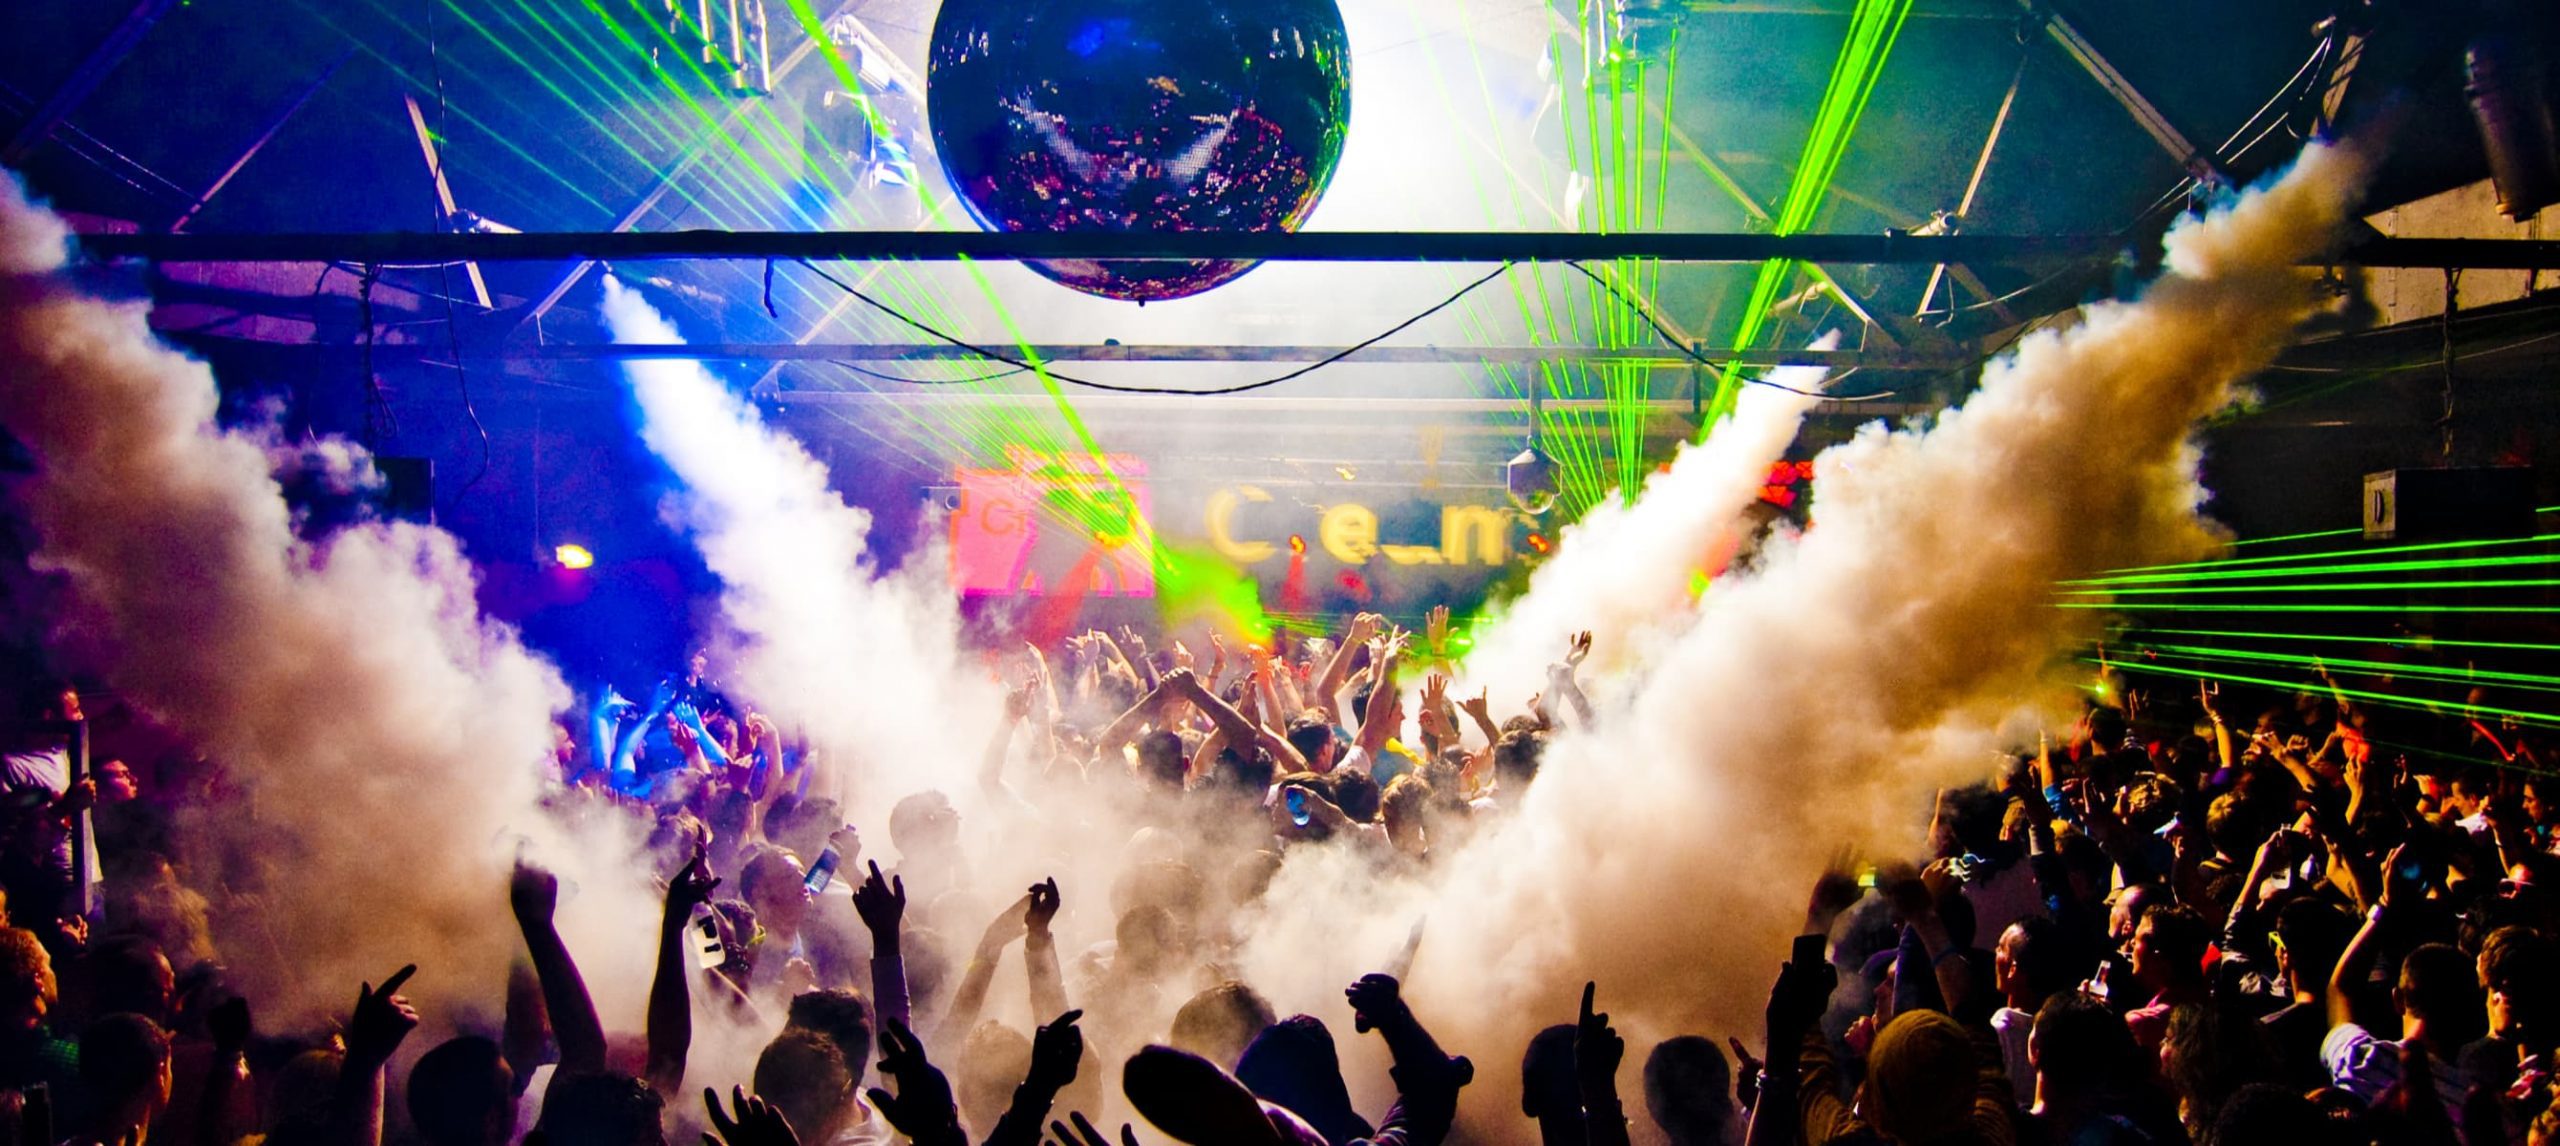 6 Clubs In Berlin For A Memorable Night Out